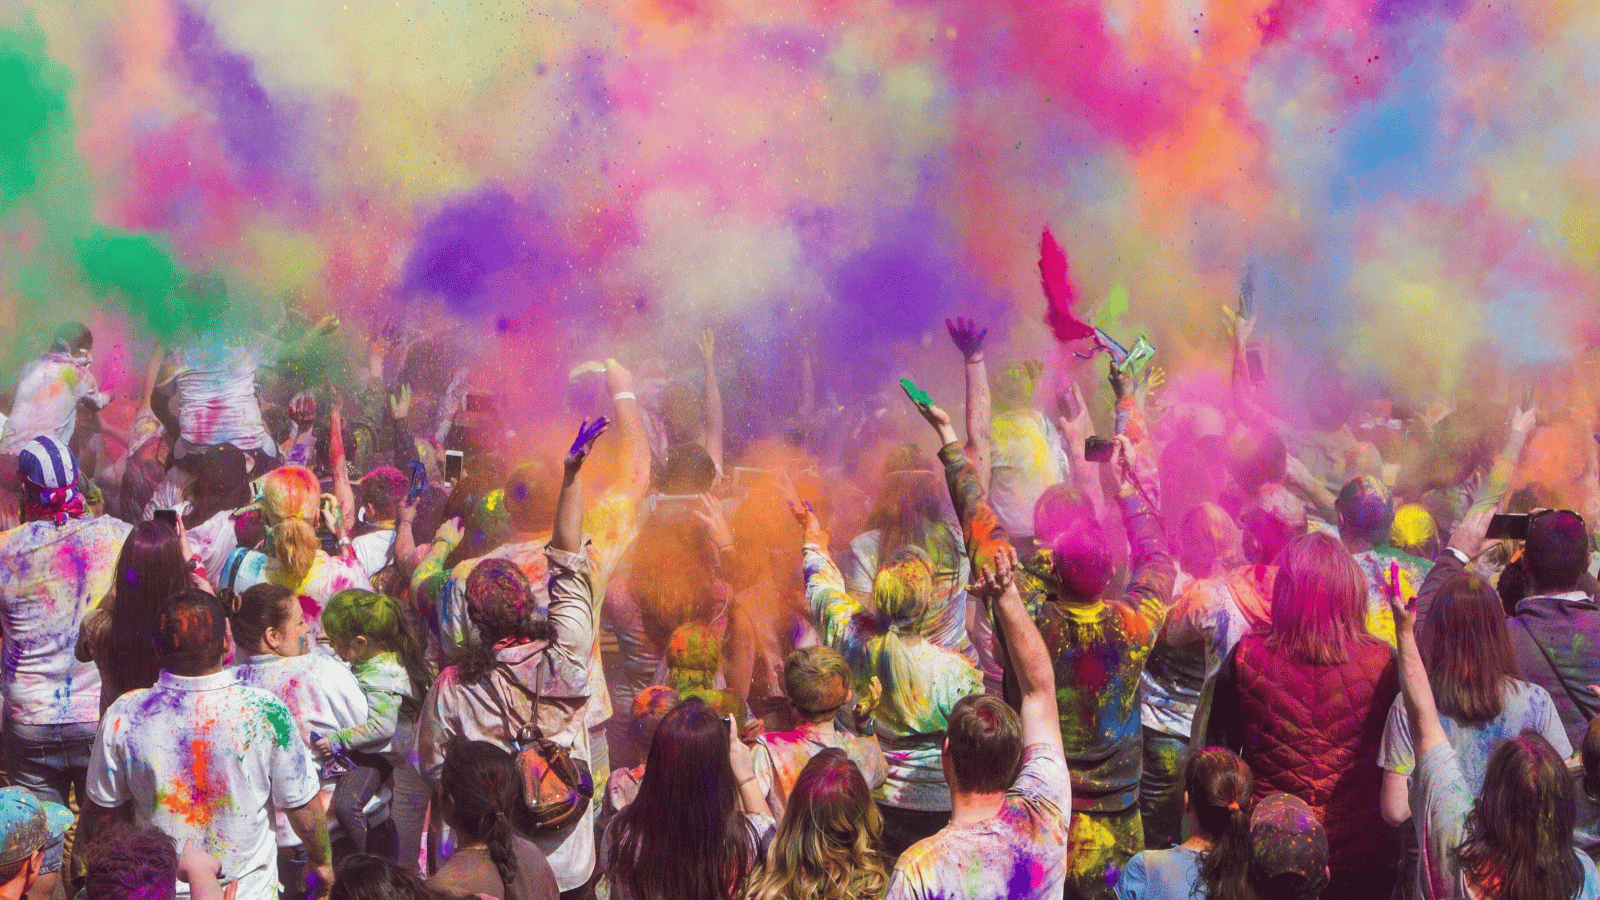 A group of young people celebrating Holi, the festival of colour